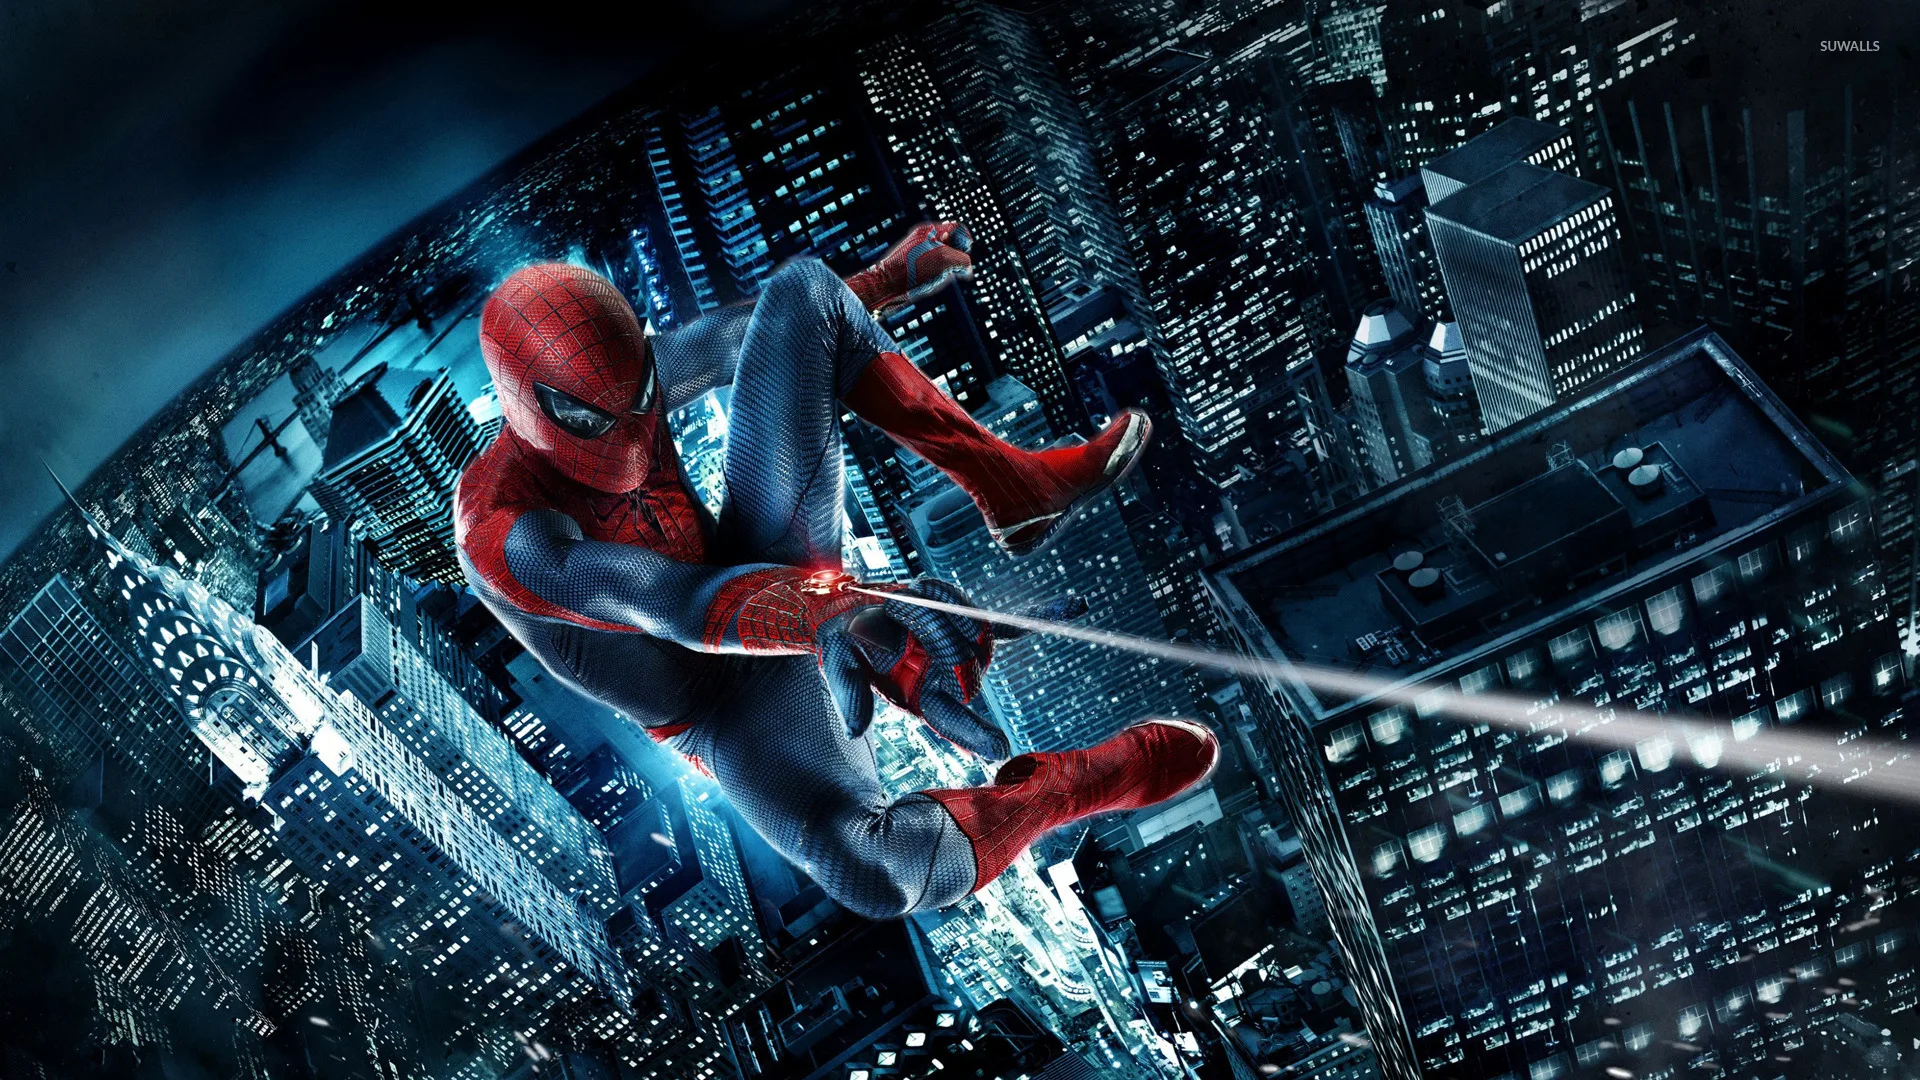 Spider-Man's Web Shooting Abilities: The Origins, Function, and Versatility of Web-shooters